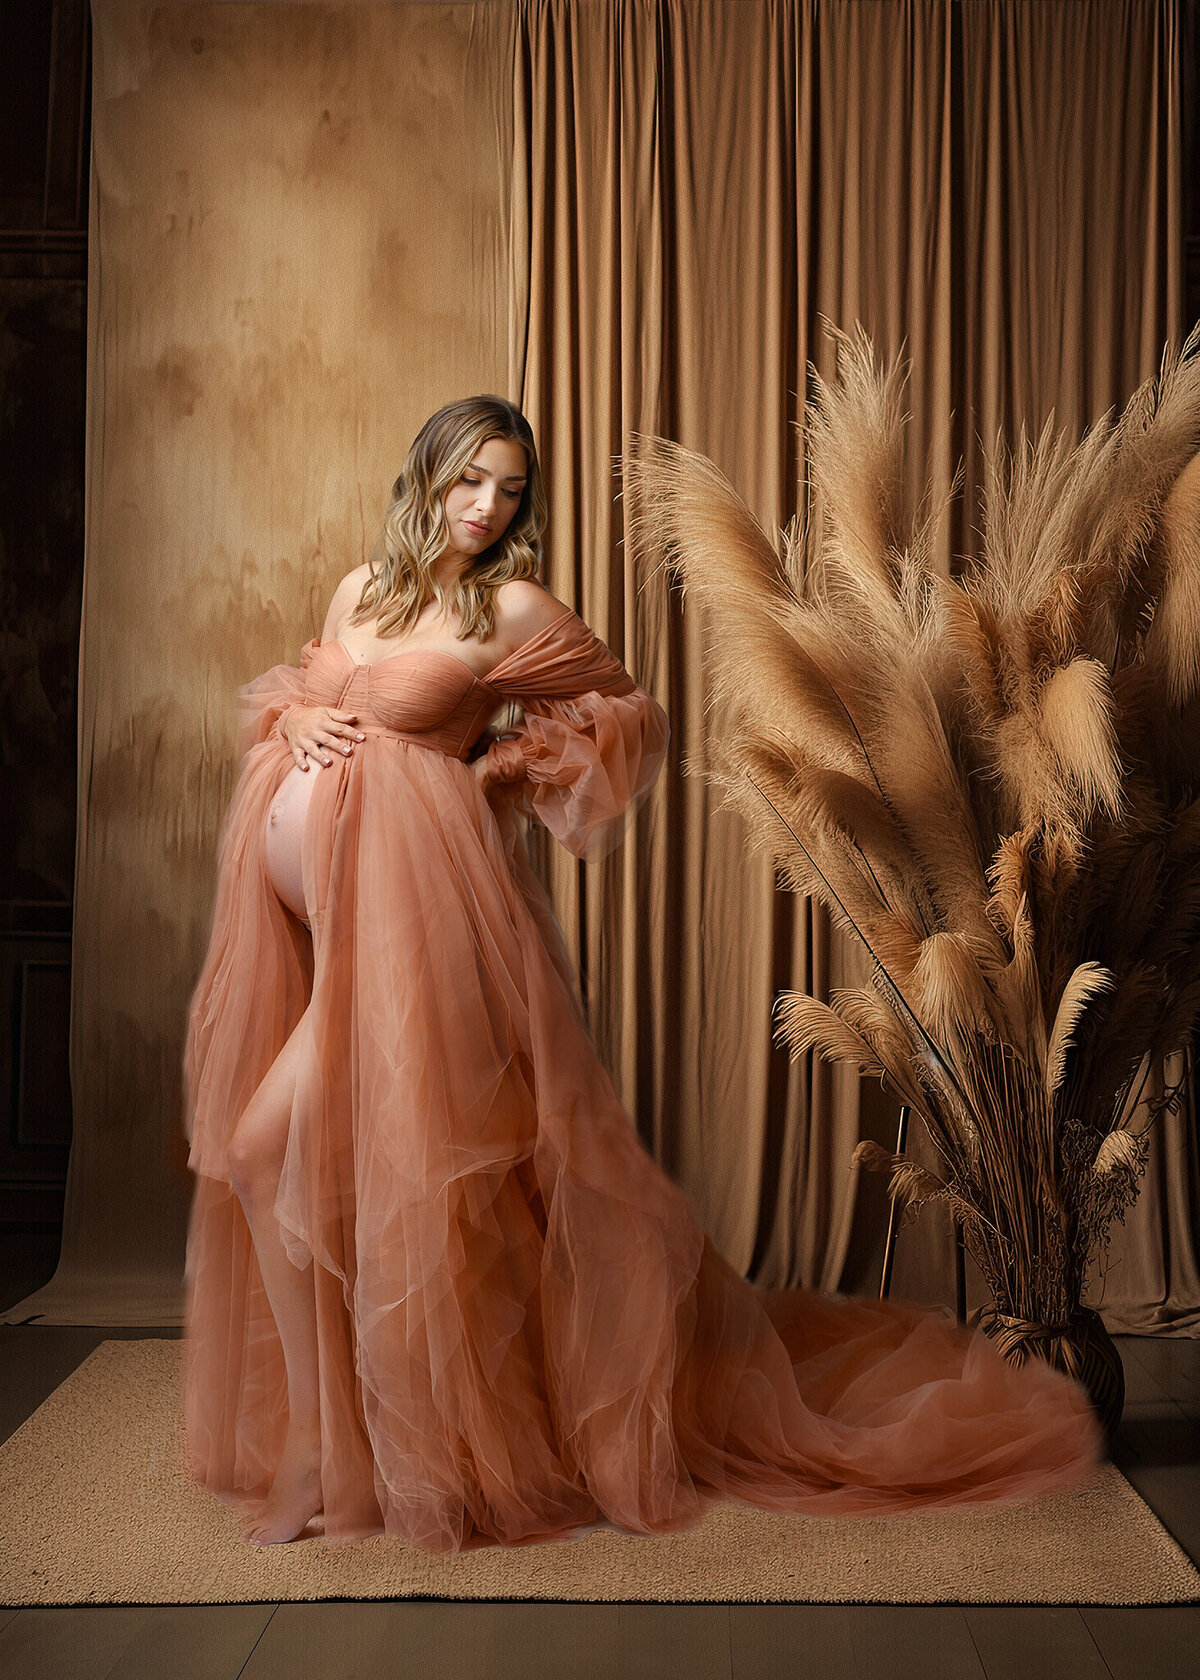 Expecting mom in a romantic set up with soft vintage pink gown standing in front of textured wall with golden curtain and dried pampas grass decor